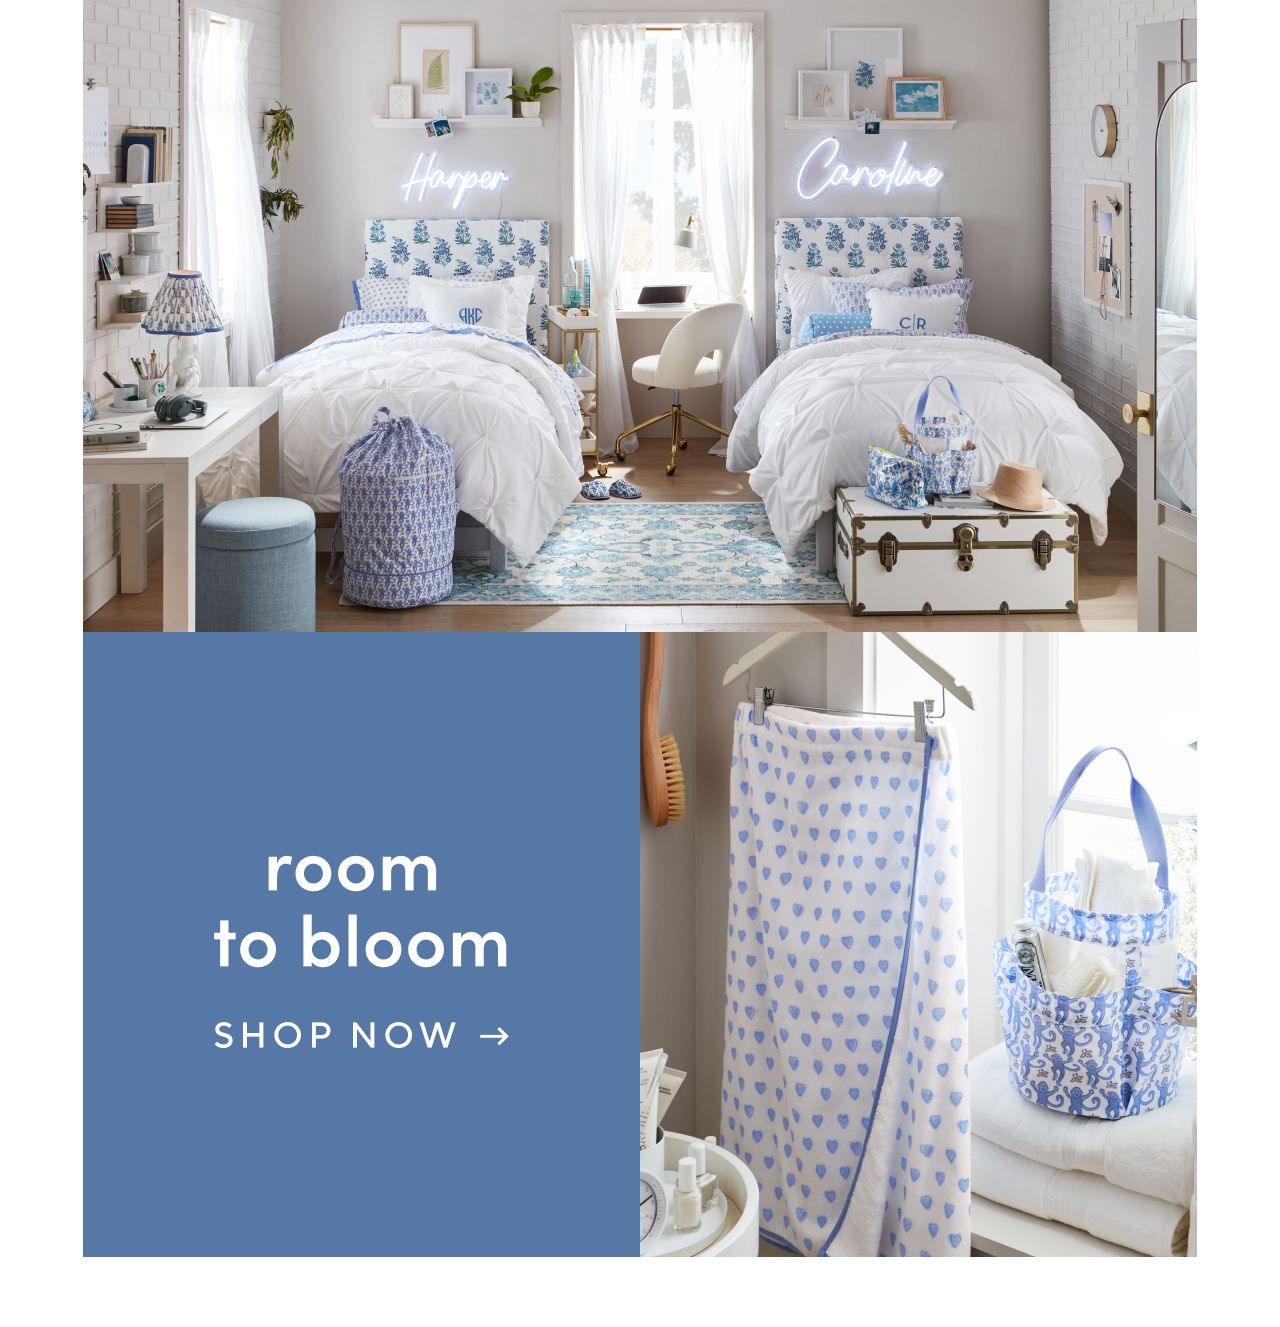 Room to bloom